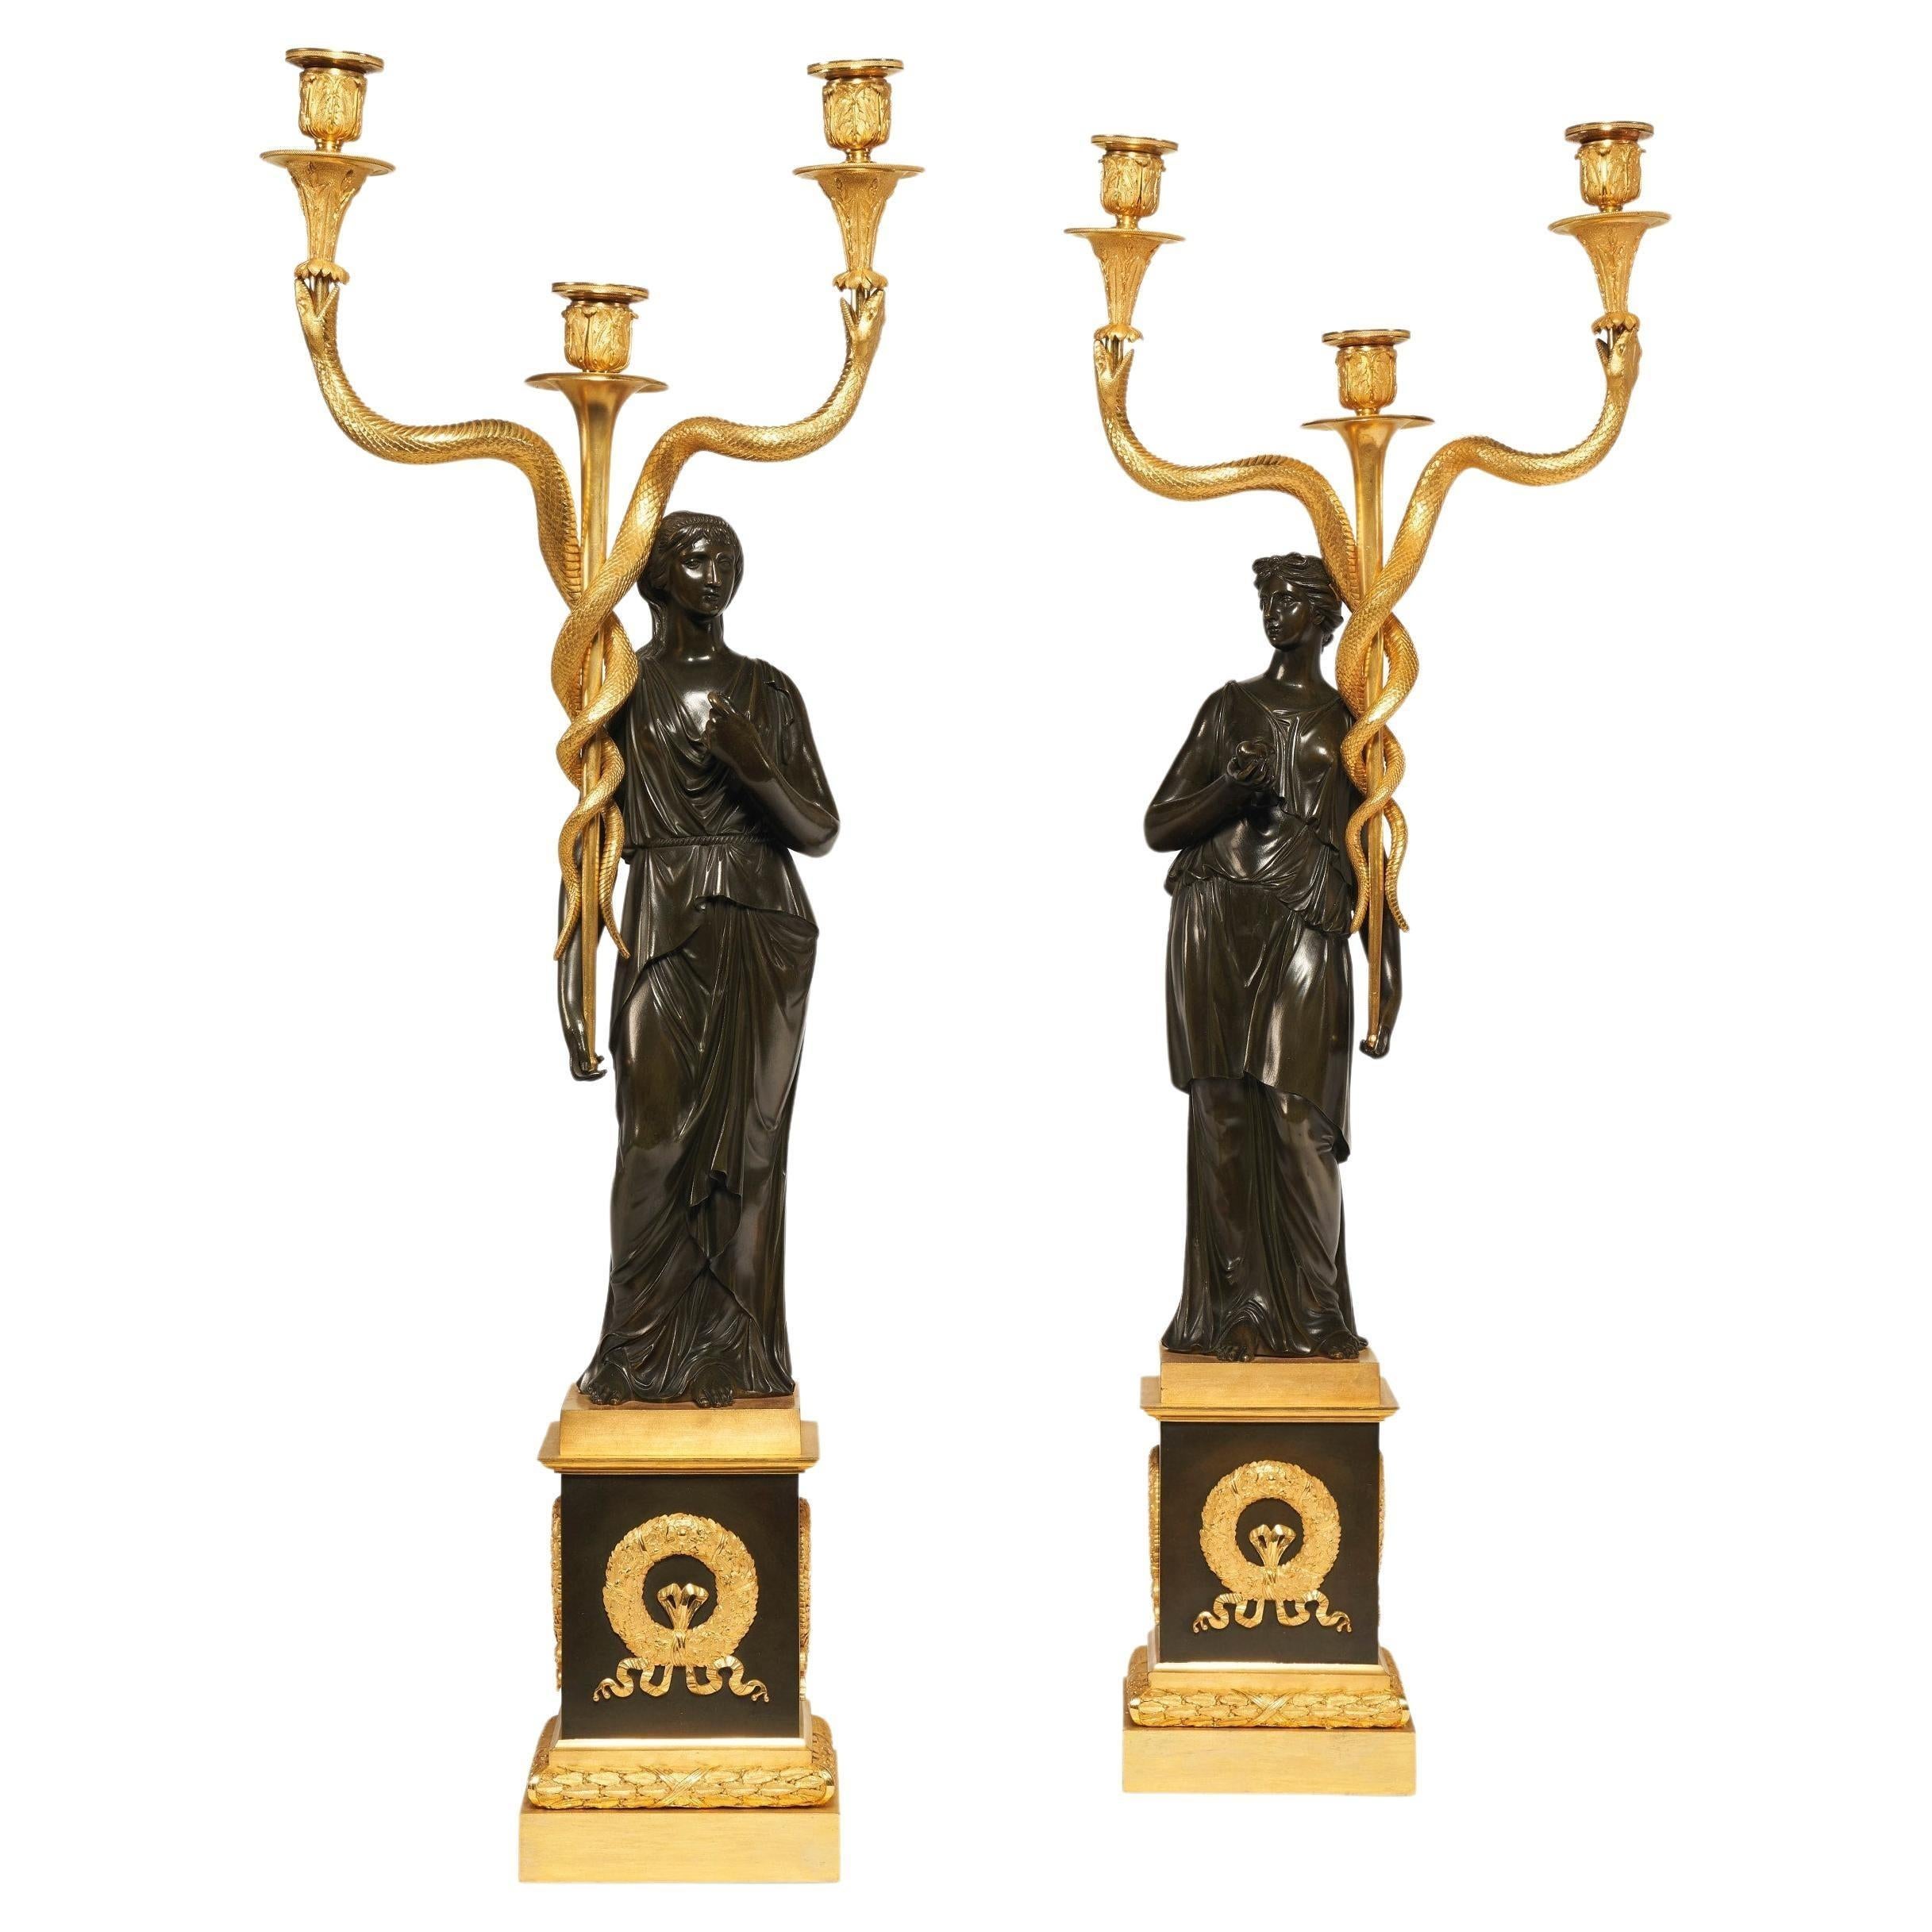 Empire Revival 19th Century French Empire Style Ormolu and Patinated Bronze Figural Candelabra For Sale